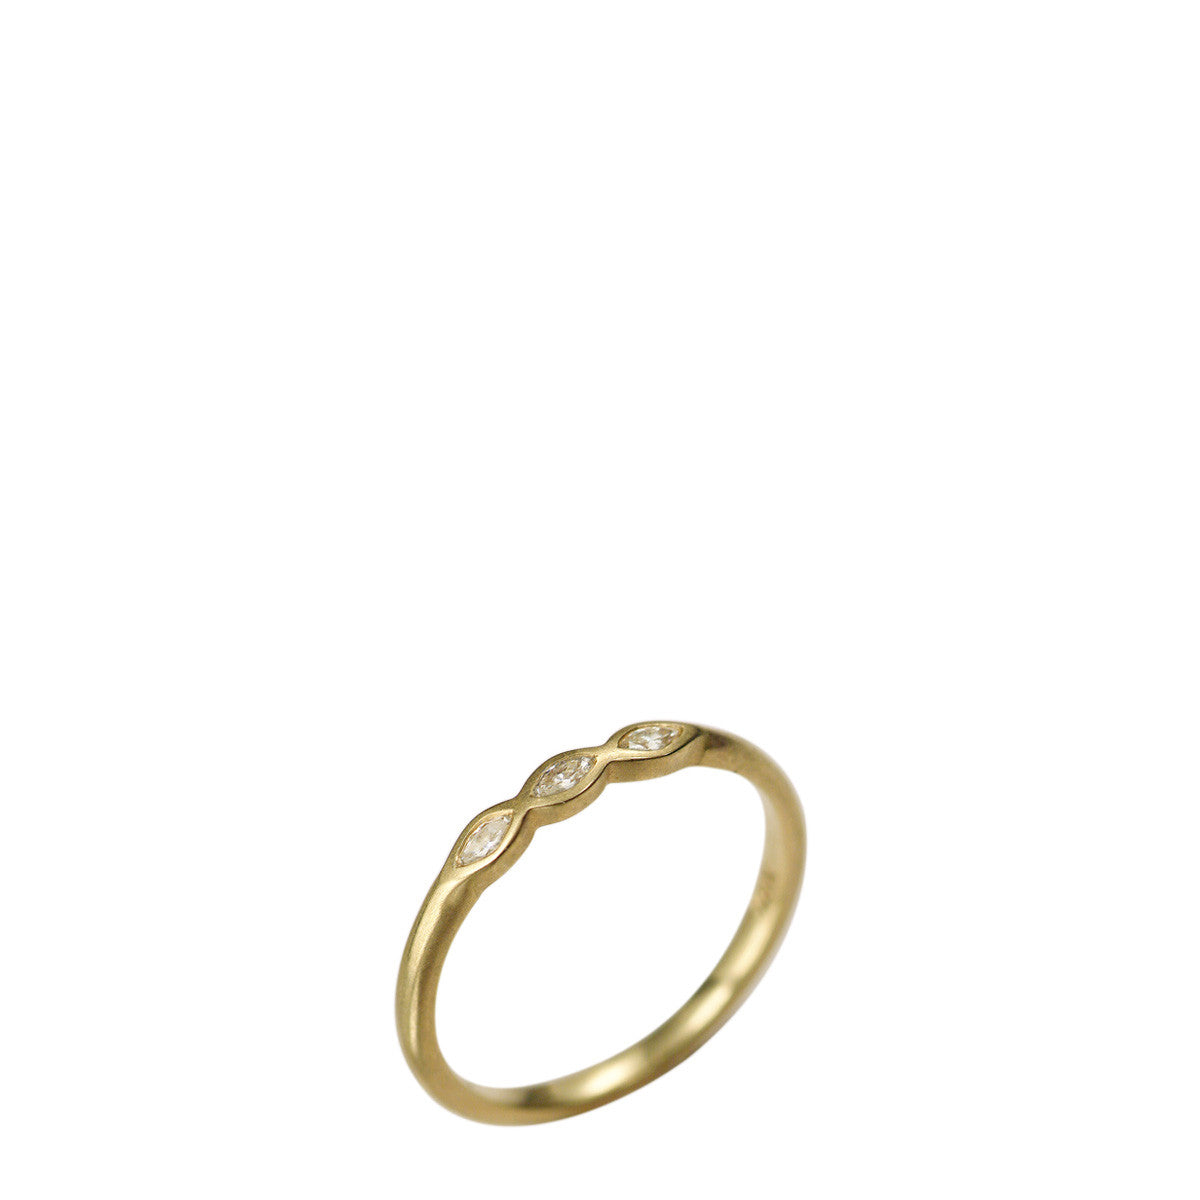 18K Gold Tiny Fish Ring with Marquise Diamond 7 / 18K Gold